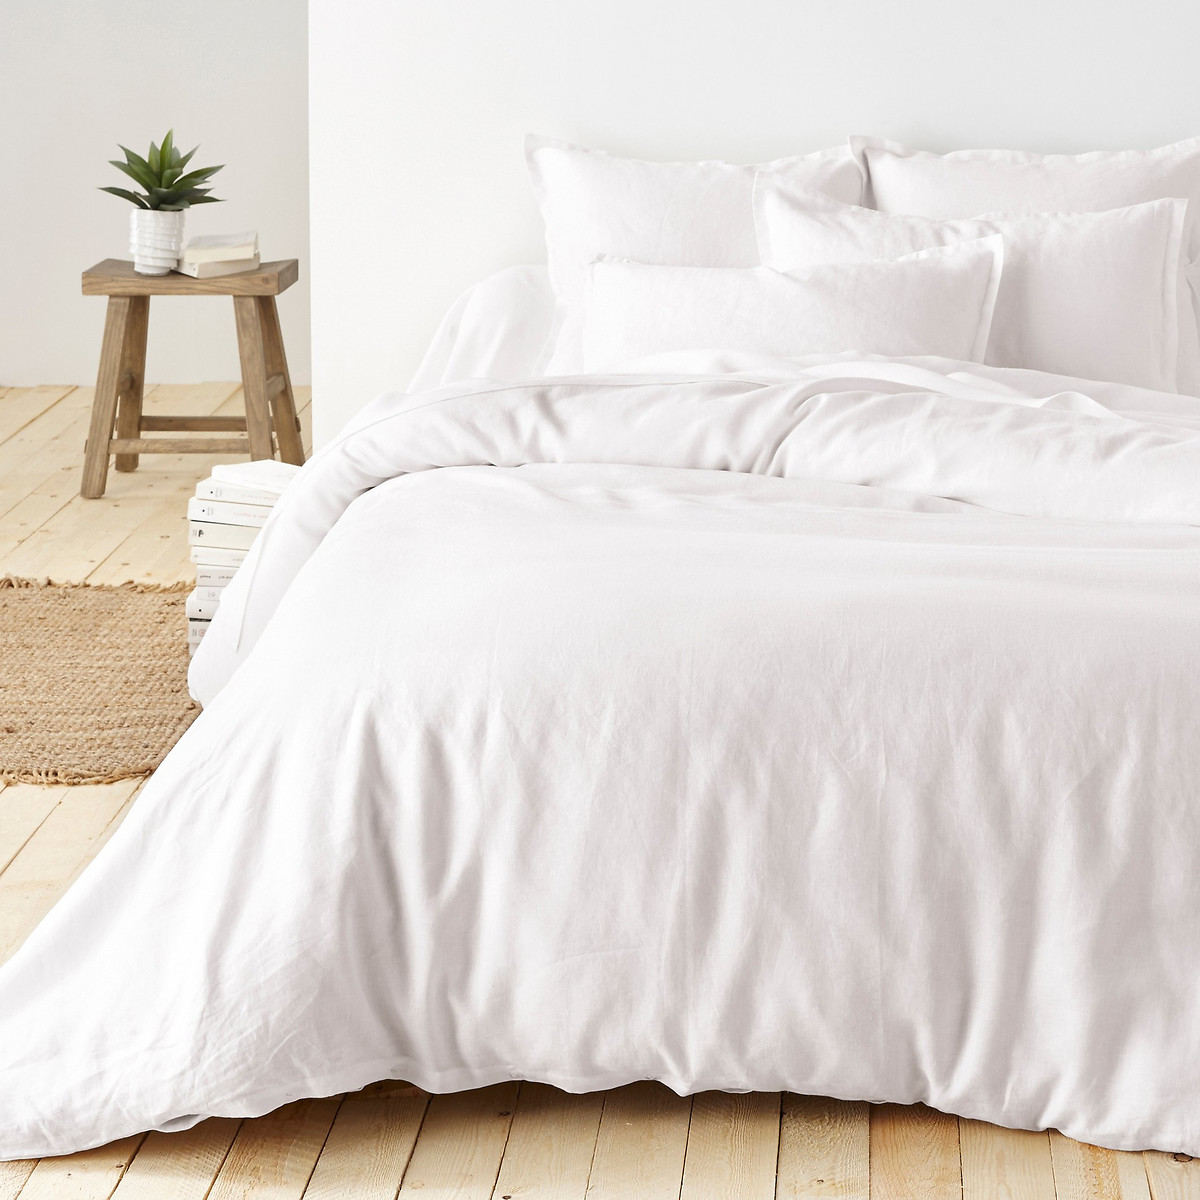 Linot Plain Washed Linen Duvet Cover La, What Is The Size Of A Queen Duvet Cover